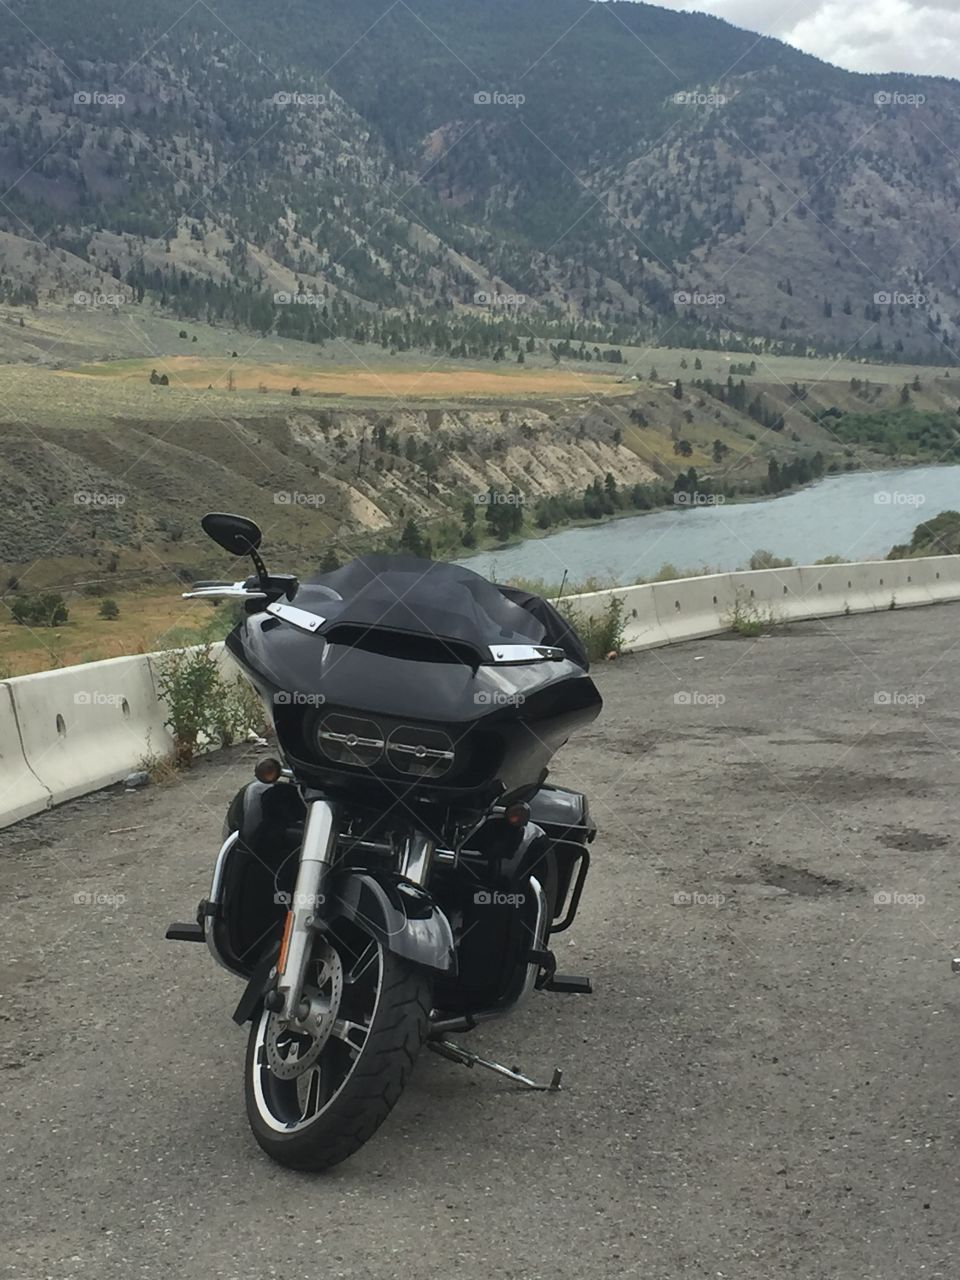 Riding through BC desert look with the heat of the day and bike it was time to capture British Columbia beauty that nature offers us for free. 